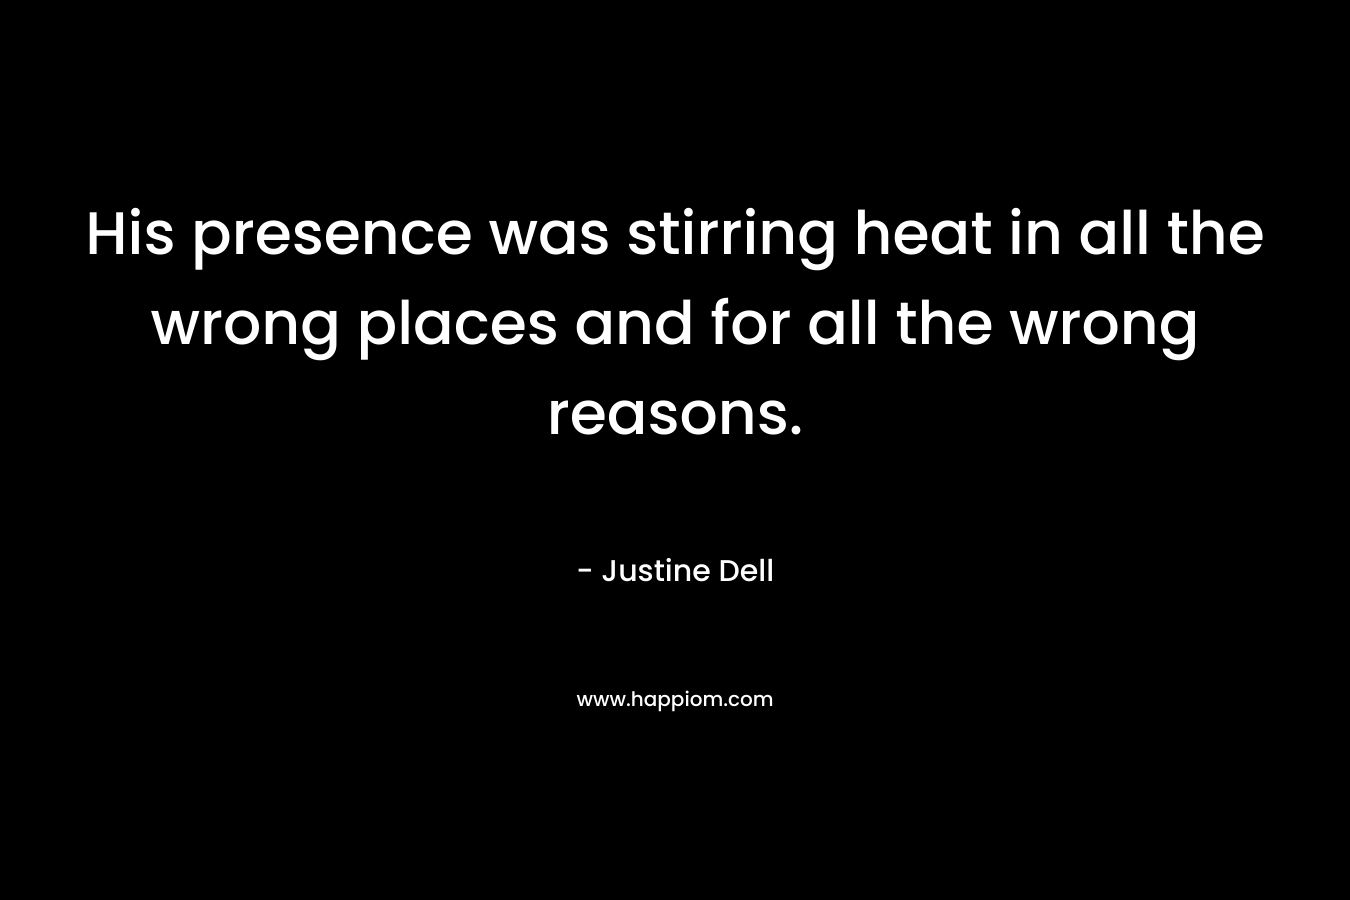 His presence was stirring heat in all the wrong places and for all the wrong reasons. – Justine Dell